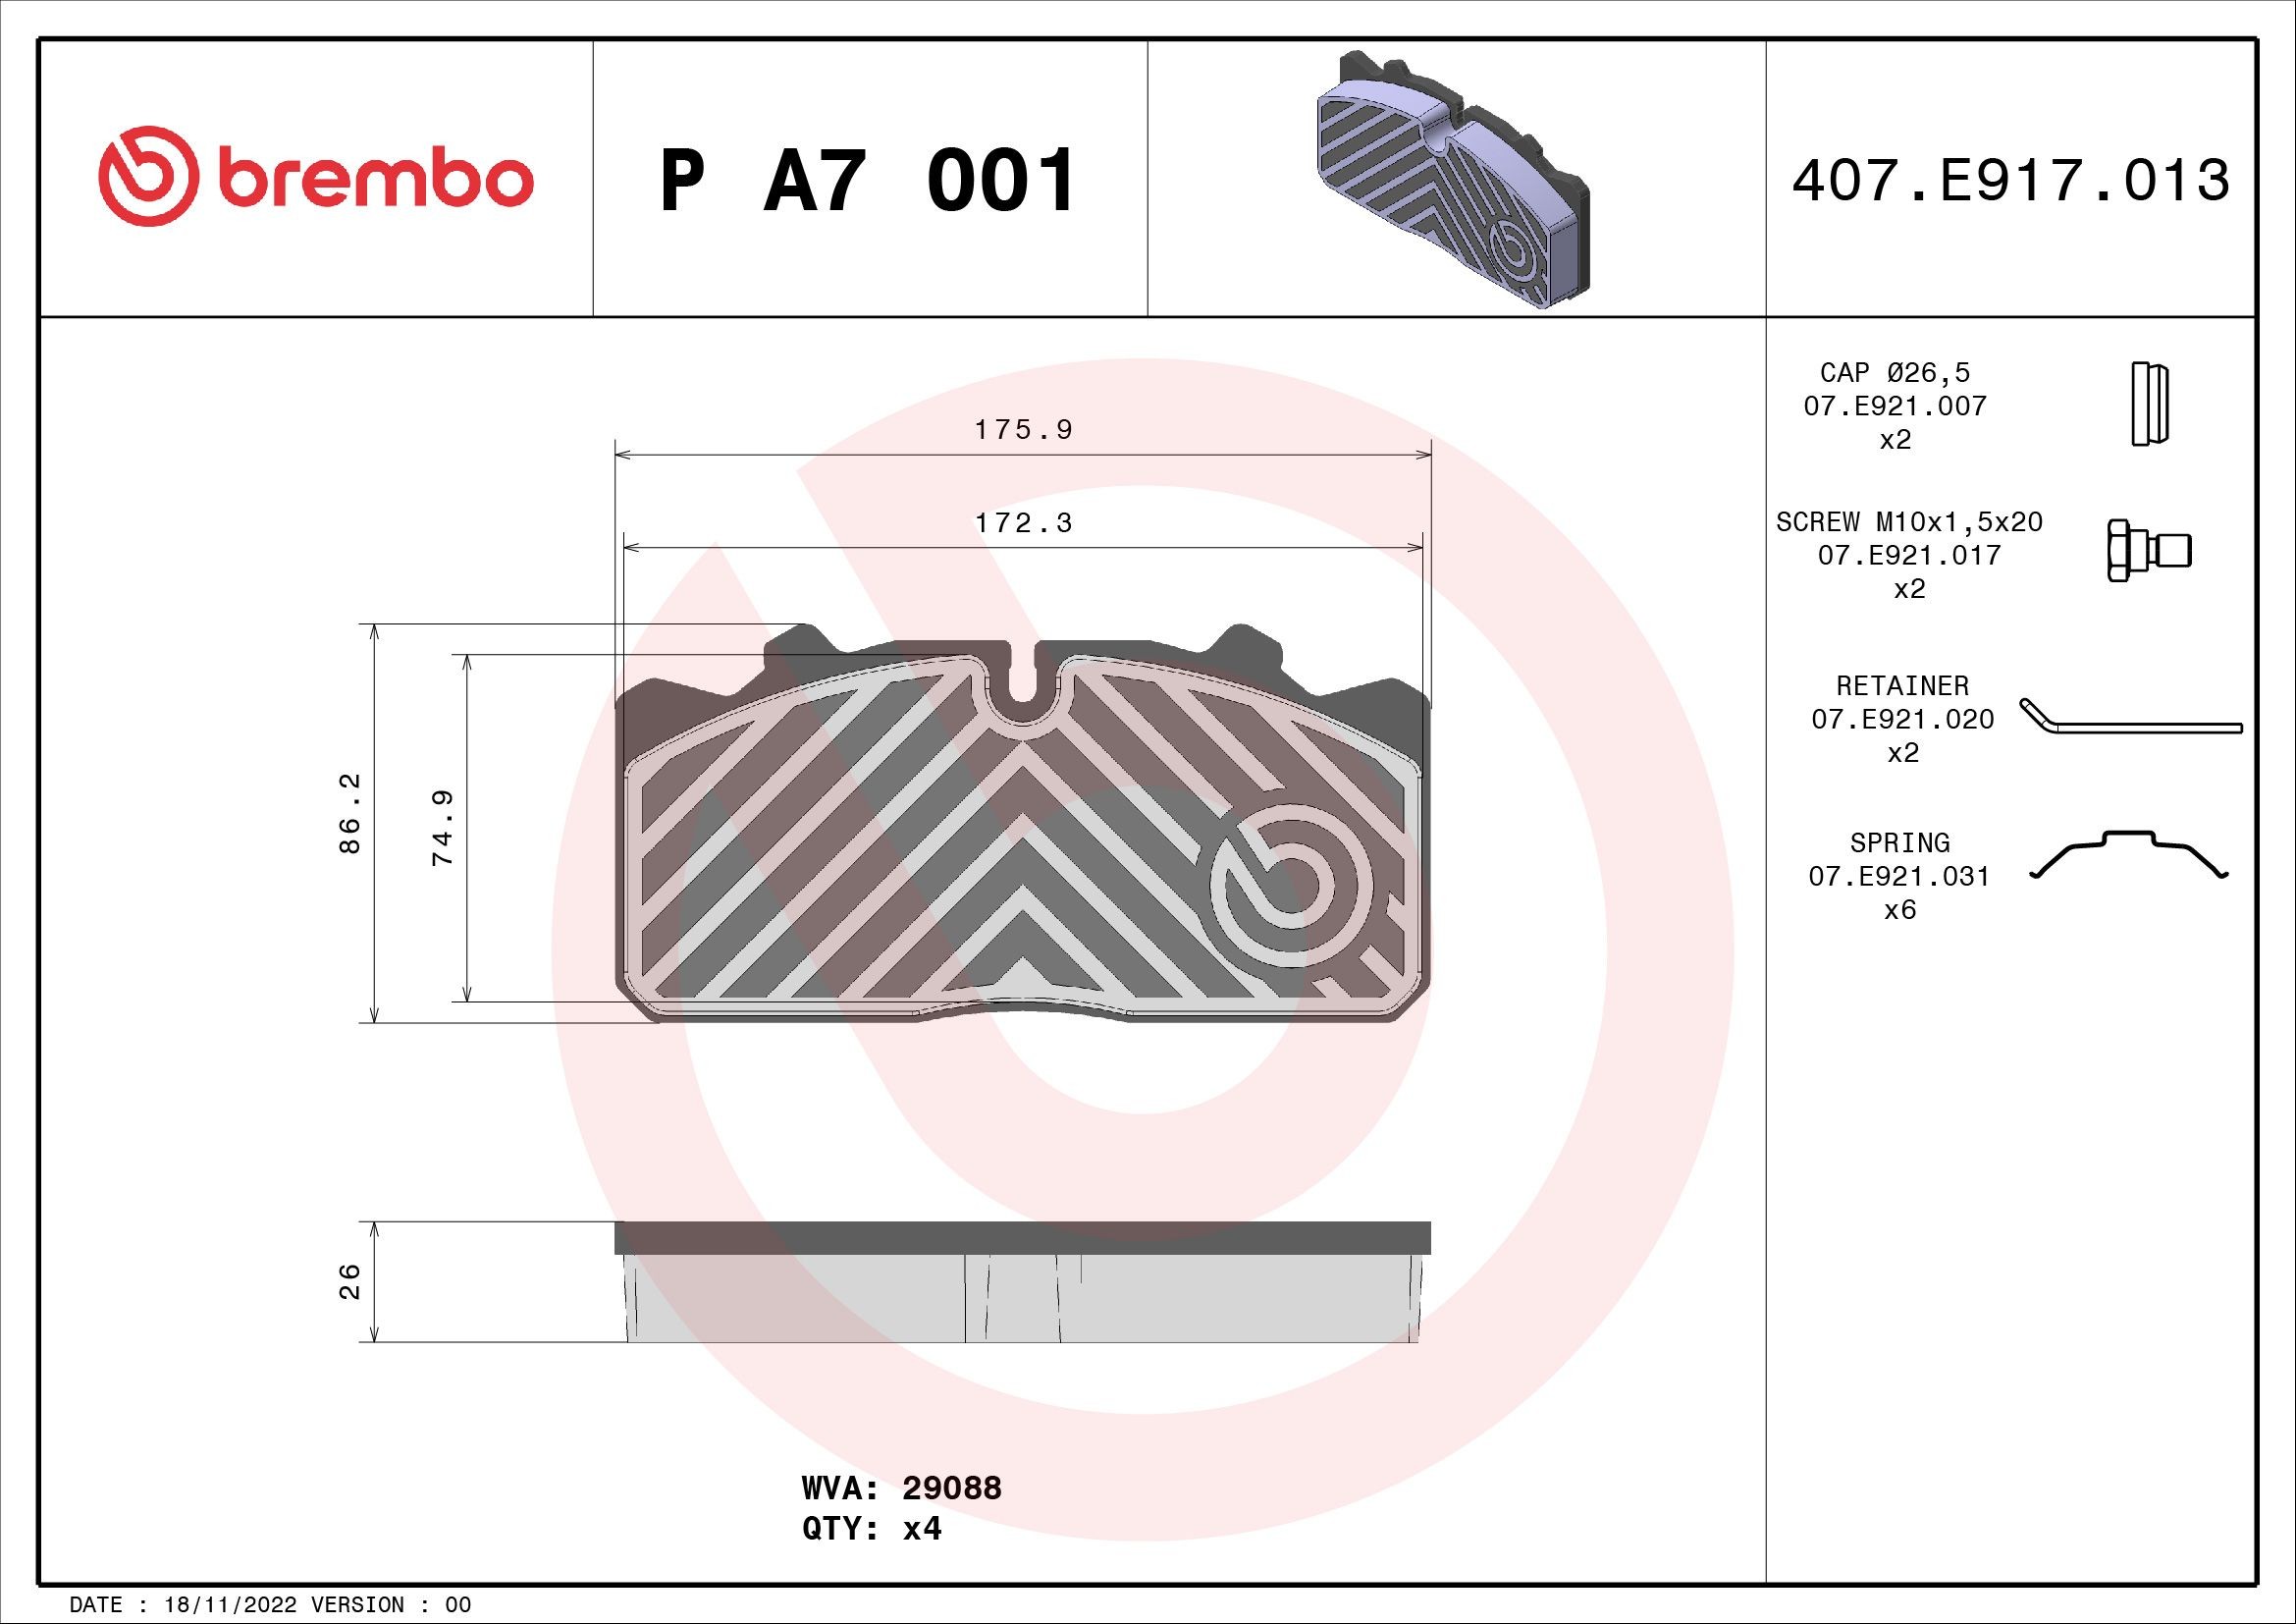 BREMBO prepared for wear indicator, with accessories Height: 86mm, Width: 176mm, Thickness: 26mm Brake pads P A7 001 buy